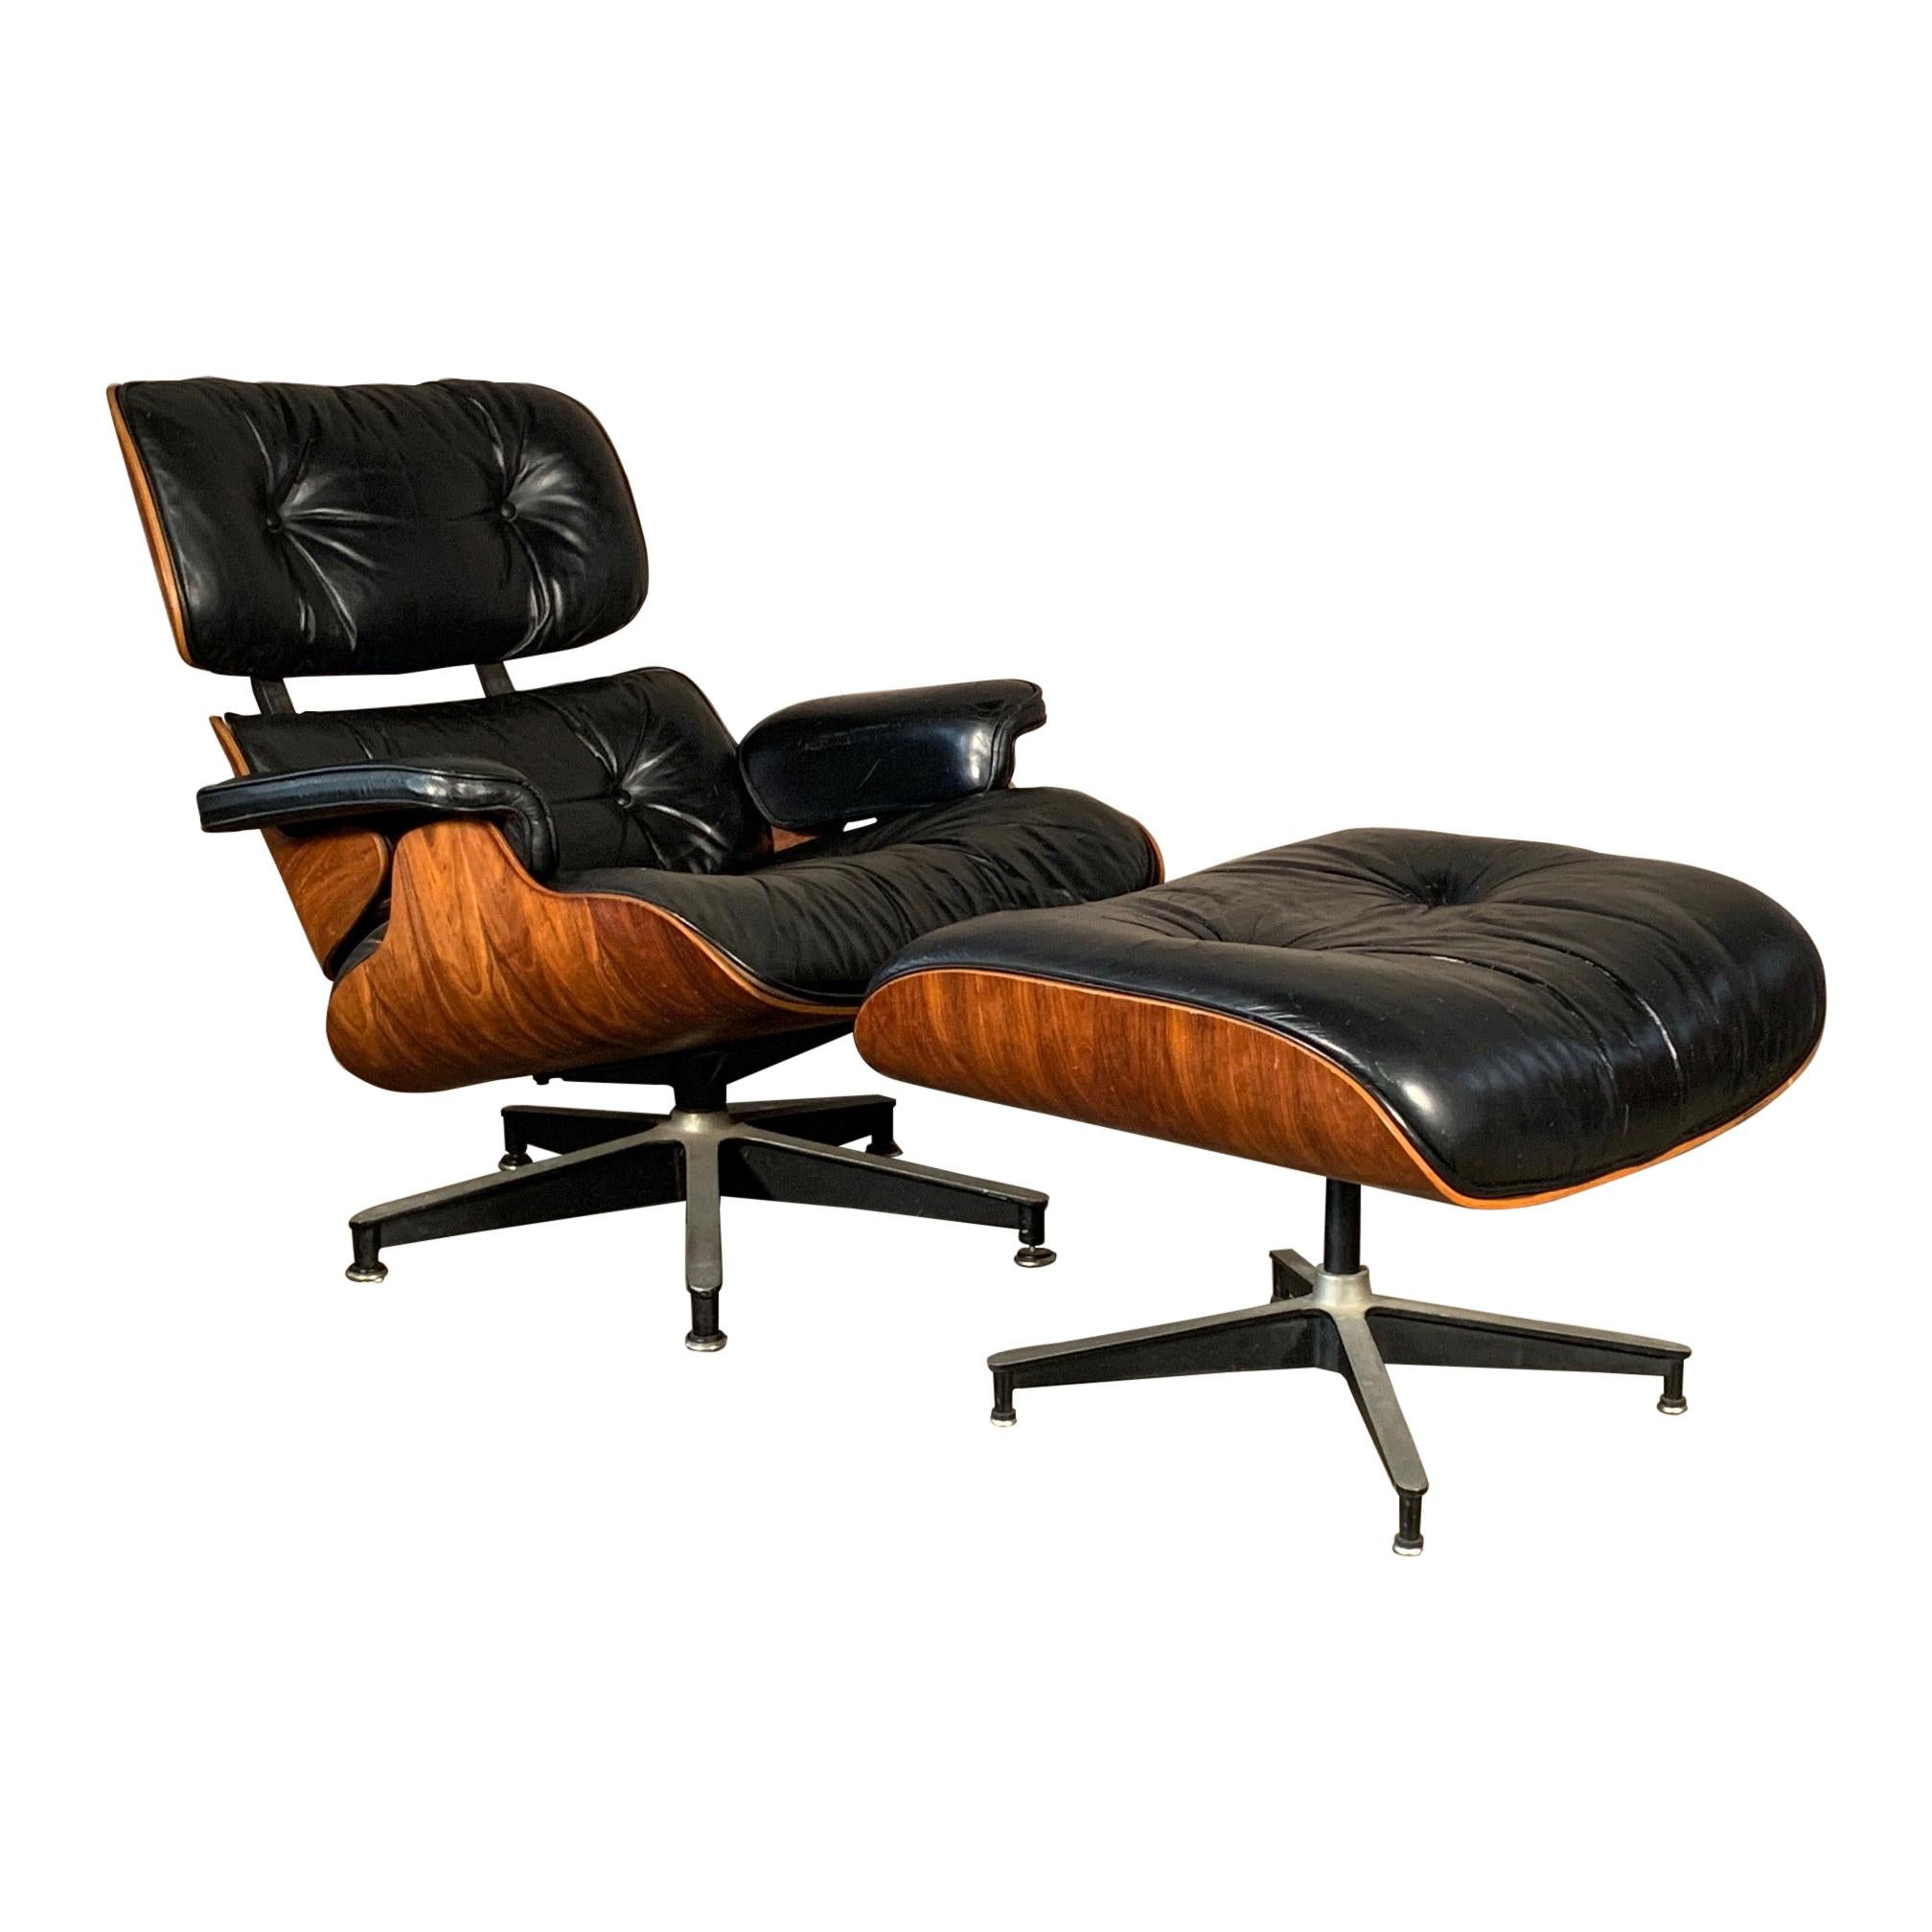 Charles Eames Herman Miller Classic Lounge Chair and Ottoman 670/671